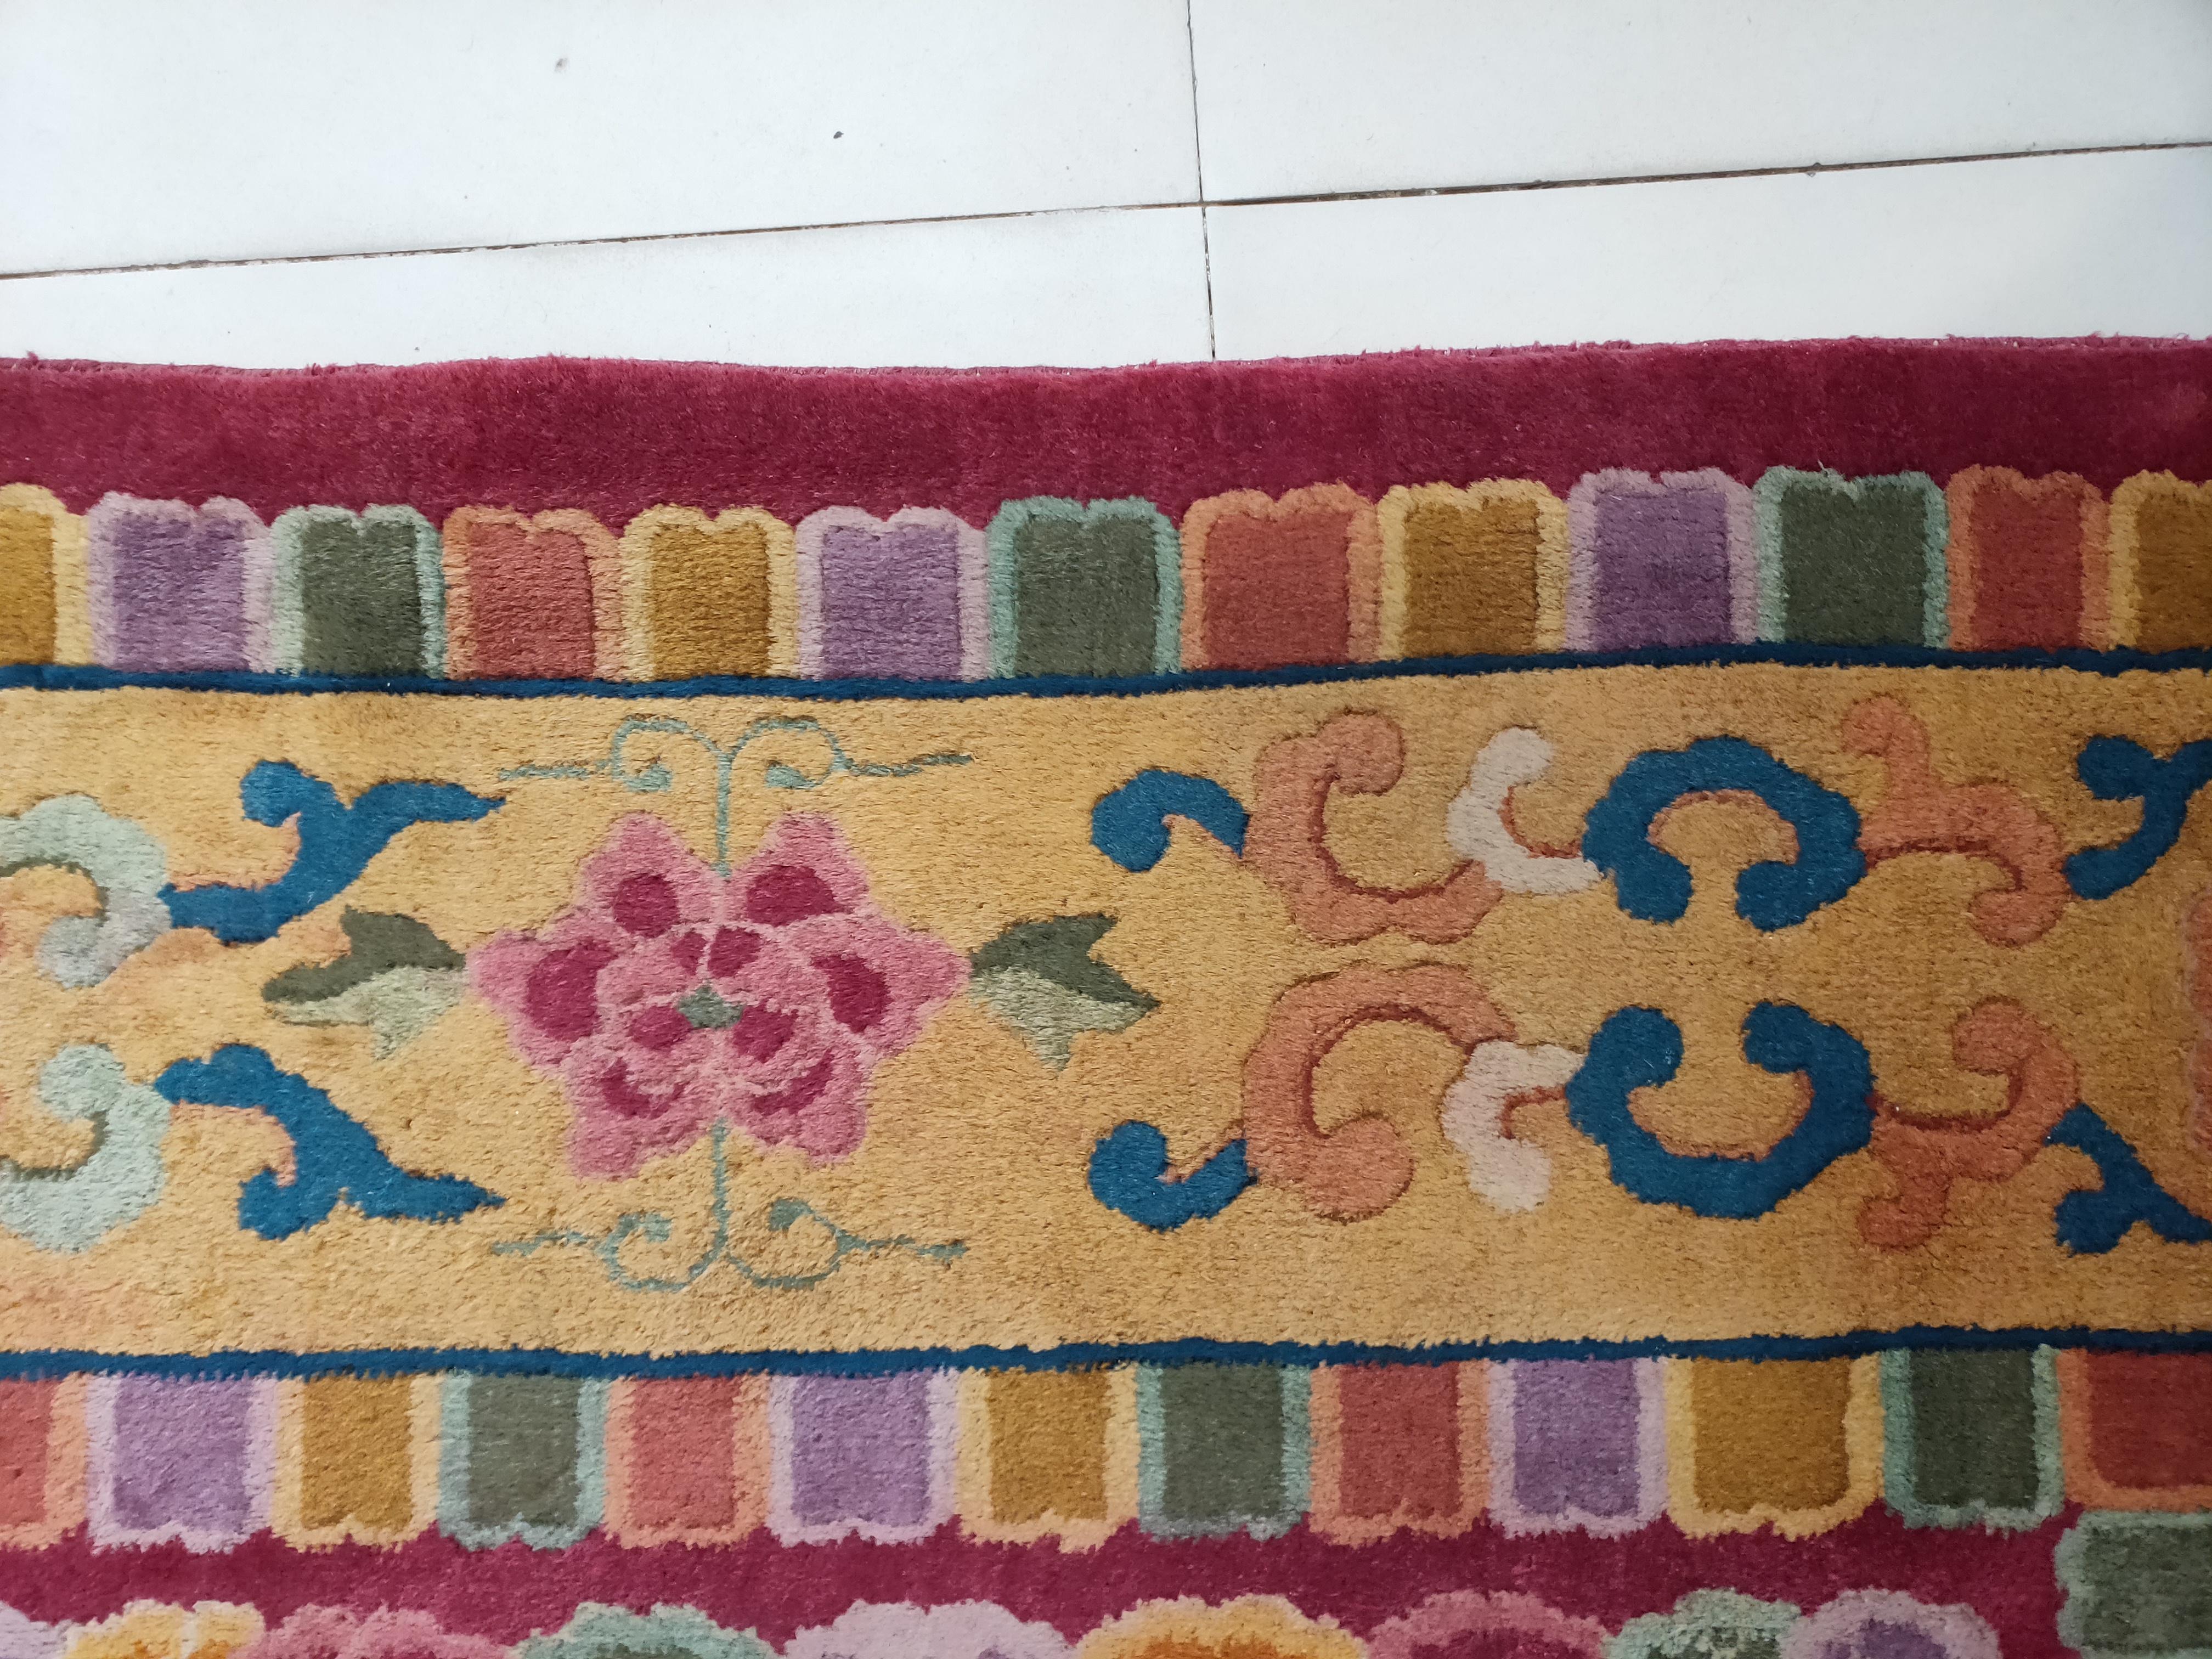 Not all Art Deco Chinese carpets are restrained or Minimalist. Nine colorful dragons fiercely writhe on a brisk red field among flaming pearls and cloud knots. A rainbow wave pattern bounds the action within a gold main band with rosettes, and